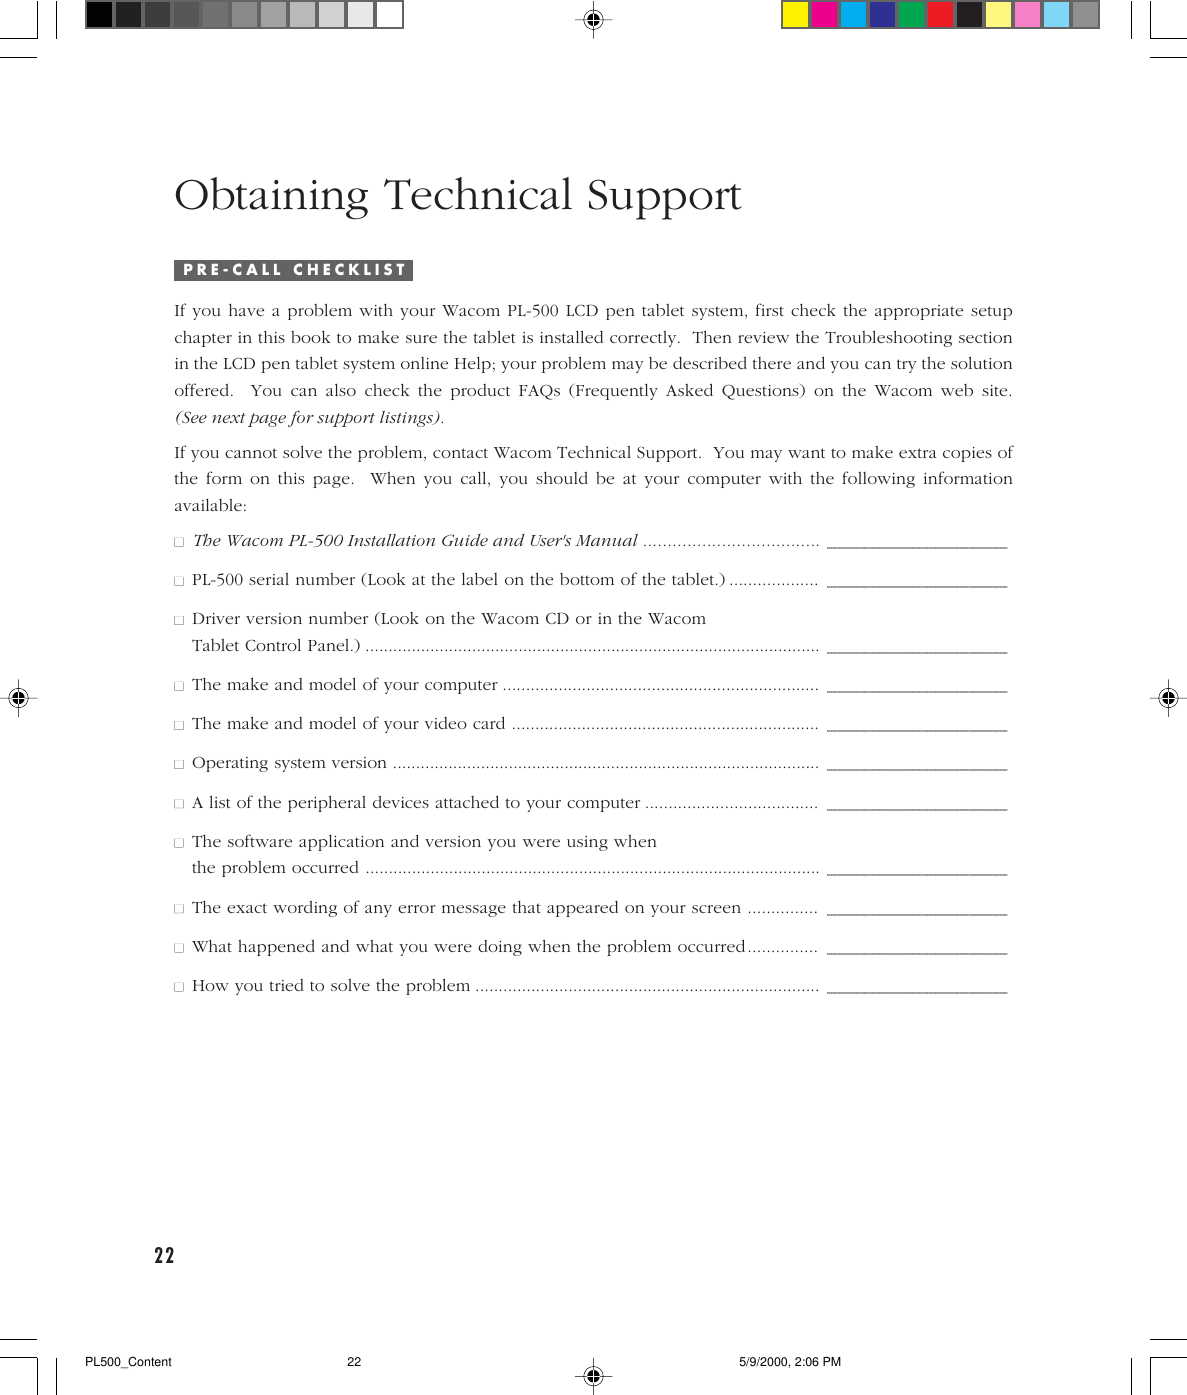 22Obtaining Technical SupportIP R E - C A L L   C H E C K L I S TIf you have a problem with your Wacom PL-500 LCD pen tablet system, first check the appropriate setupchapter in this book to make sure the tablet is installed correctly.  Then review the Troubleshooting sectionin the LCD pen tablet system online Help; your problem may be described there and you can try the solutionoffered.  You can also check the product FAQs (Frequently Asked Questions) on the Wacom web site.(See next page for support listings).If you cannot solve the problem, contact Wacom Technical Support.  You may want to make extra copies ofthe form on this page.  When you call, you should be at your computer with the following informationavailable:■■The Wacom PL-500 Installation Guide and User&apos;s Manual ....................................____________________________________________________________________________________________________________________________________________________________________________________________________________■■PL-500 serial number (Look at the label on the bottom of the tablet.) ...................____________________________________________________________________________________________________________________________________________________________________________________________________________■■Driver version number (Look on the Wacom CD or in the WacomTablet Control Panel.) ..................................................................................................____________________________________________________________________________________________________________________________________________________________________________________________________________■■The make and model of your computer ....................................................................____________________________________________________________________________________________________________________________________________________________________________________________________________■■The make and model of your video card ..................................................................____________________________________________________________________________________________________________________________________________________________________________________________________________■■Operating system version ............................................................................................____________________________________________________________________________________________________________________________________________________________________________________________________________■■A list of the peripheral devices attached to your computer .....................................____________________________________________________________________________________________________________________________________________________________________________________________________________■■The software application and version you were using whenthe problem occurred ..................................................................................................____________________________________________________________________________________________________________________________________________________________________________________________________________■■The exact wording of any error message that appeared on your screen ...............____________________________________________________________________________________________________________________________________________________________________________________________________________■■What happened and what you were doing when the problem occurred...............____________________________________________________________________________________________________________________________________________________________________________________________________________■■How you tried to solve the problem ..........................................................................____________________________________________________________________________________________________________________________________________________________________________________________________________PL500_Content 5/9/2000, 2:06 PM22